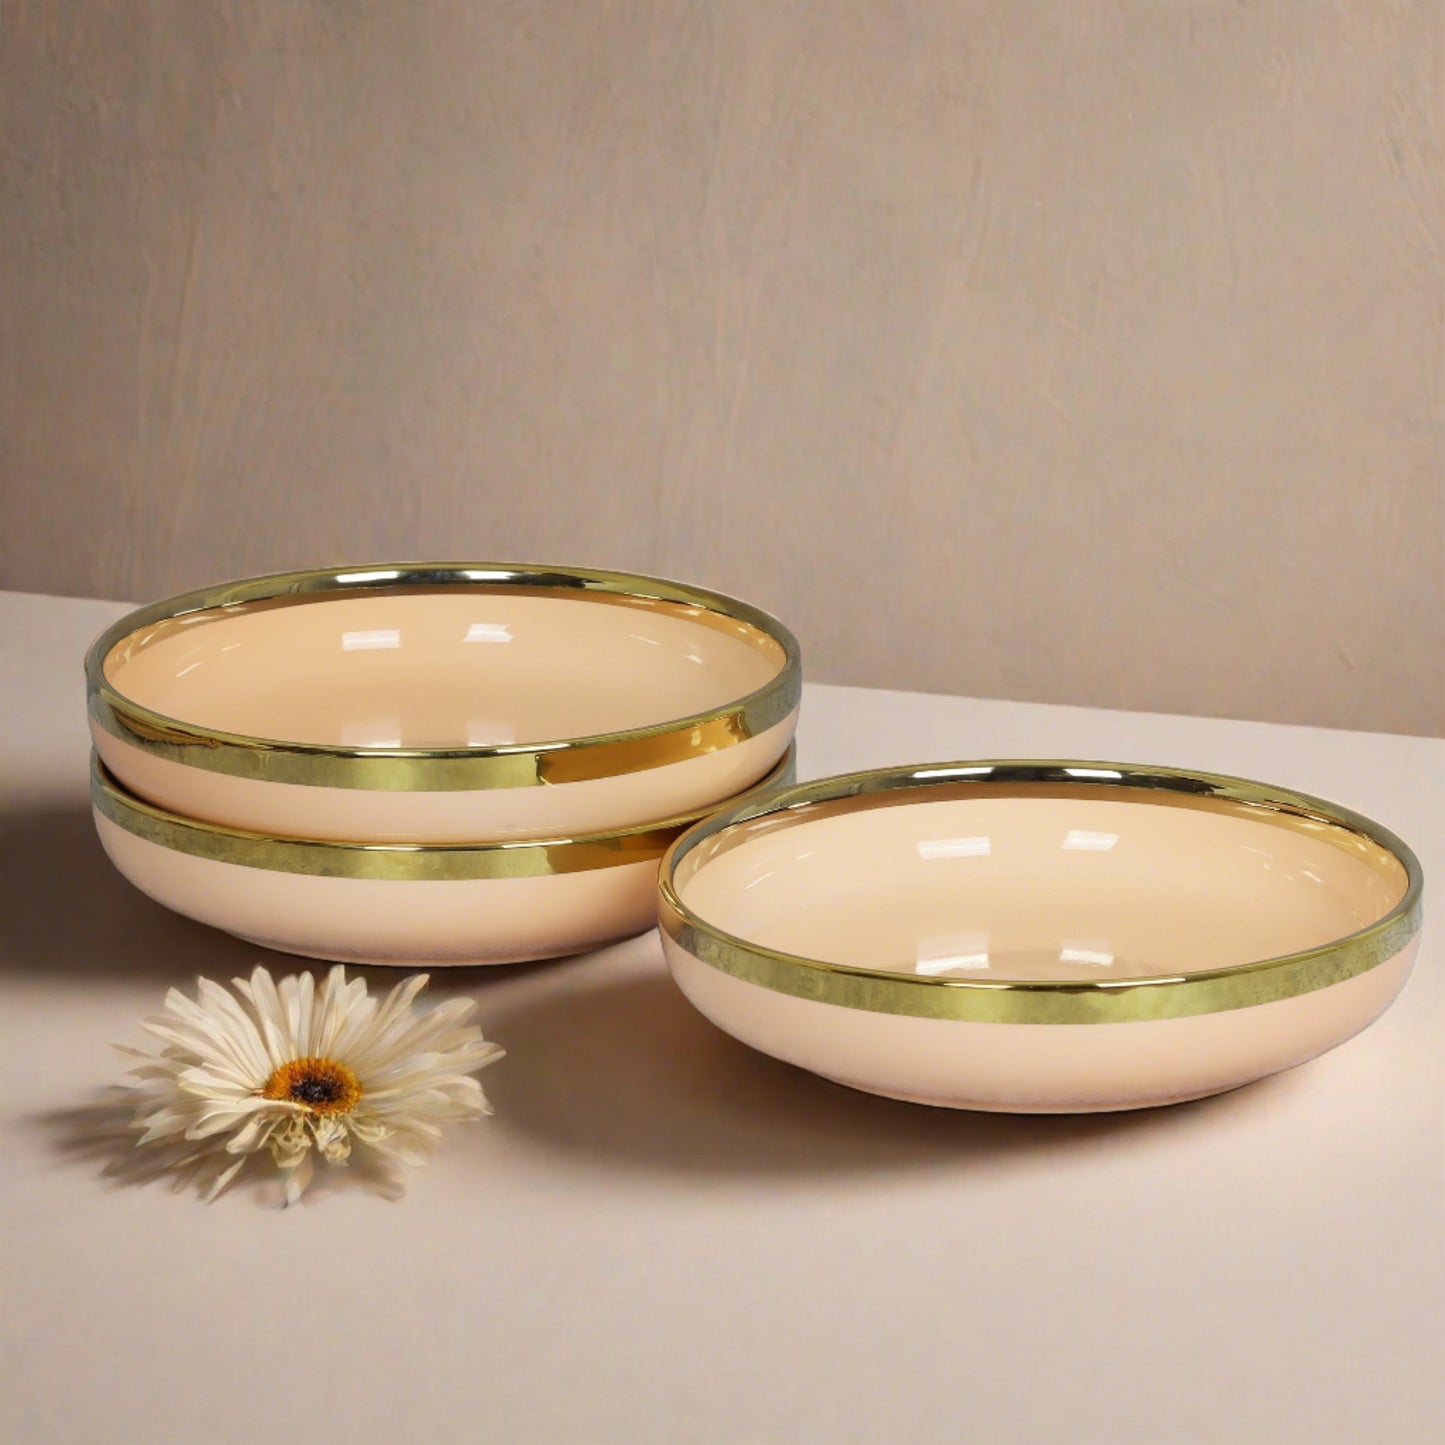 Complete ceramic pasta bowl set - perfect for serving and enjoying pasta dishes.